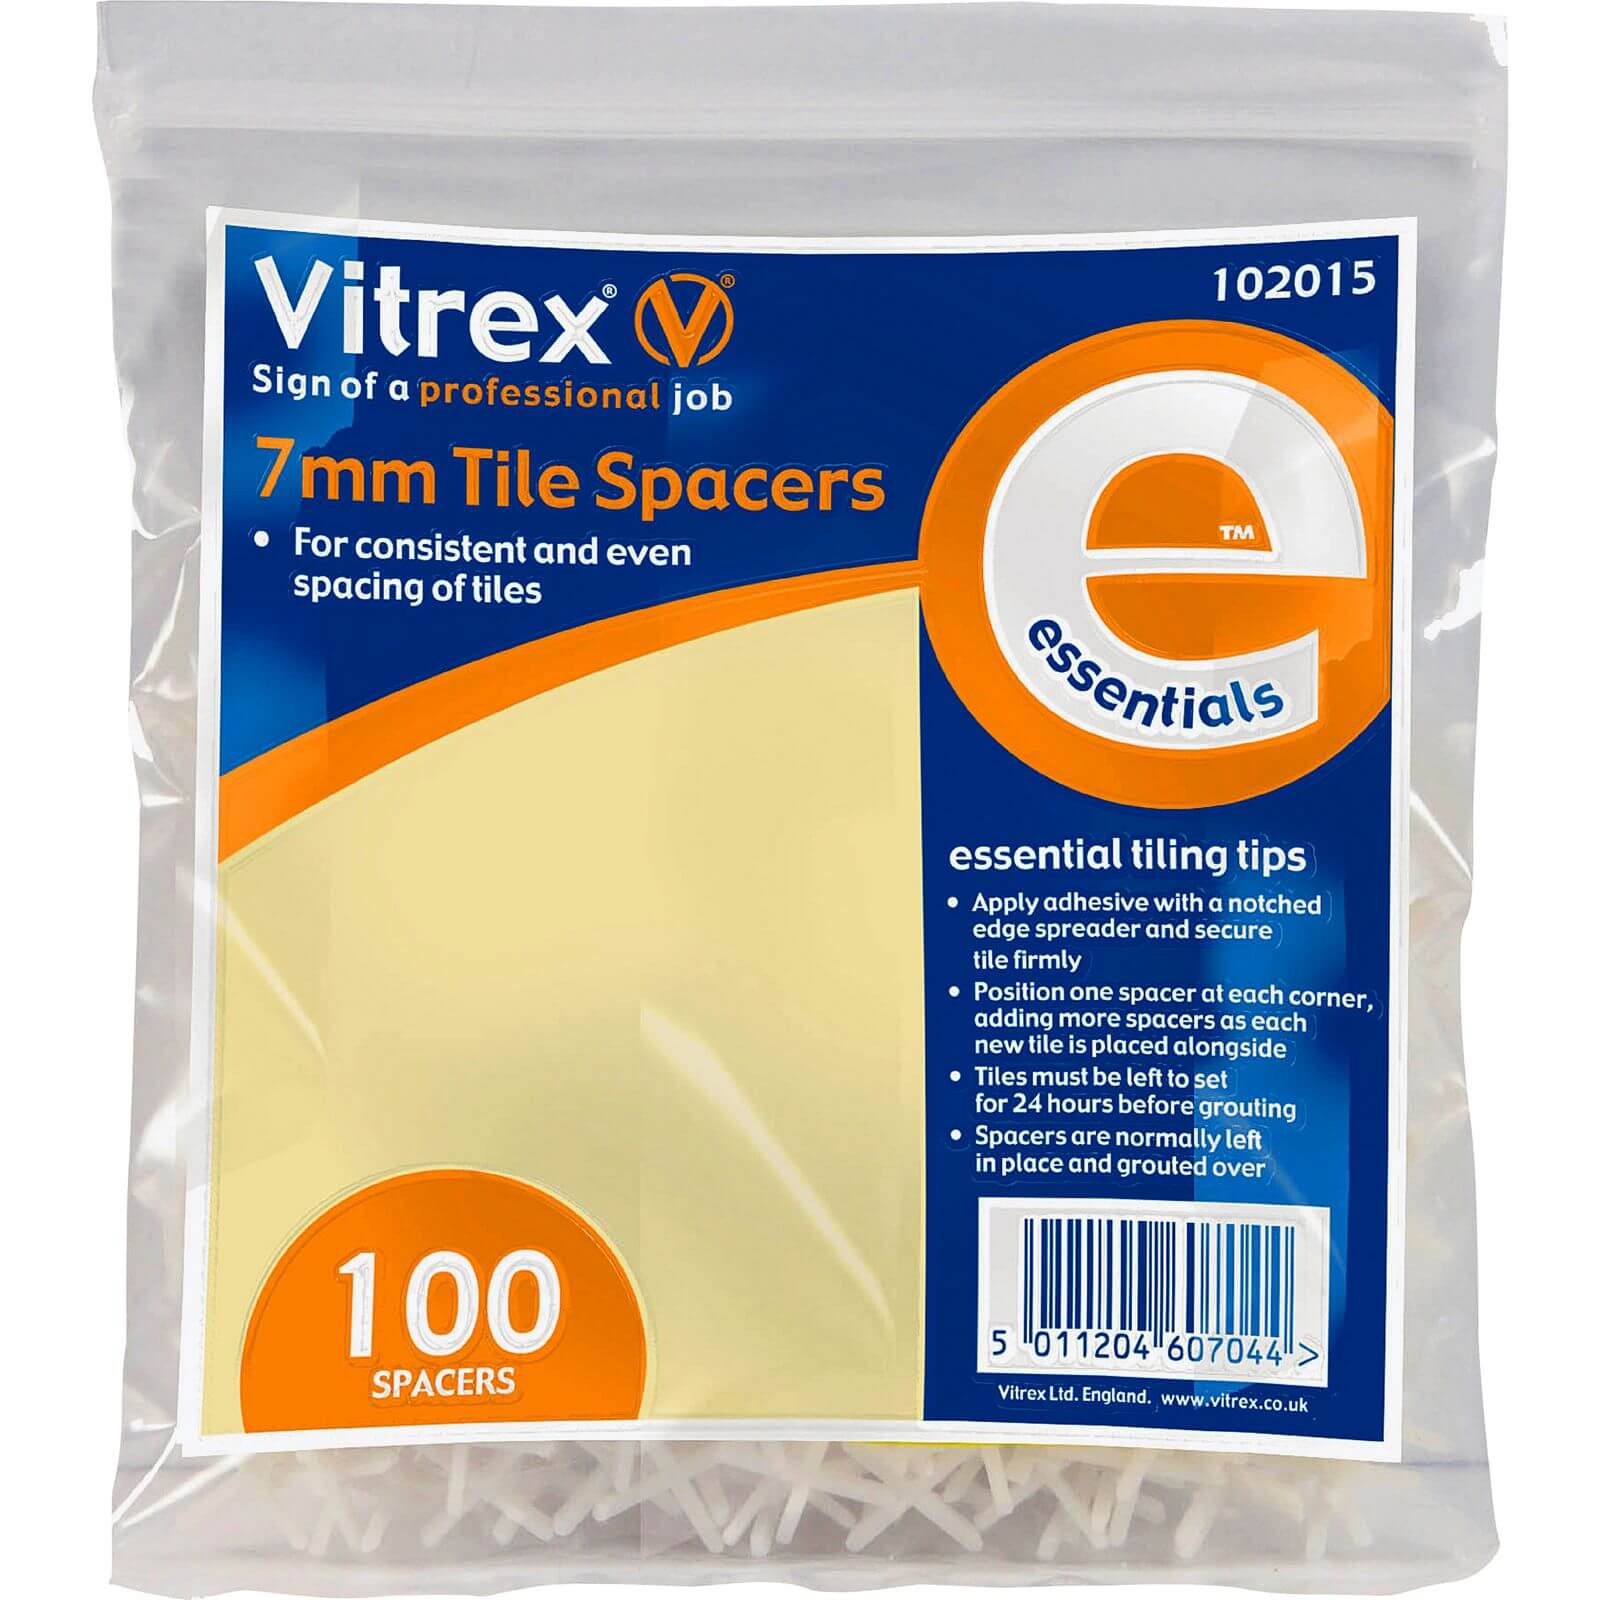 Photo of Vitrex Tile Spacers - 100x7mm